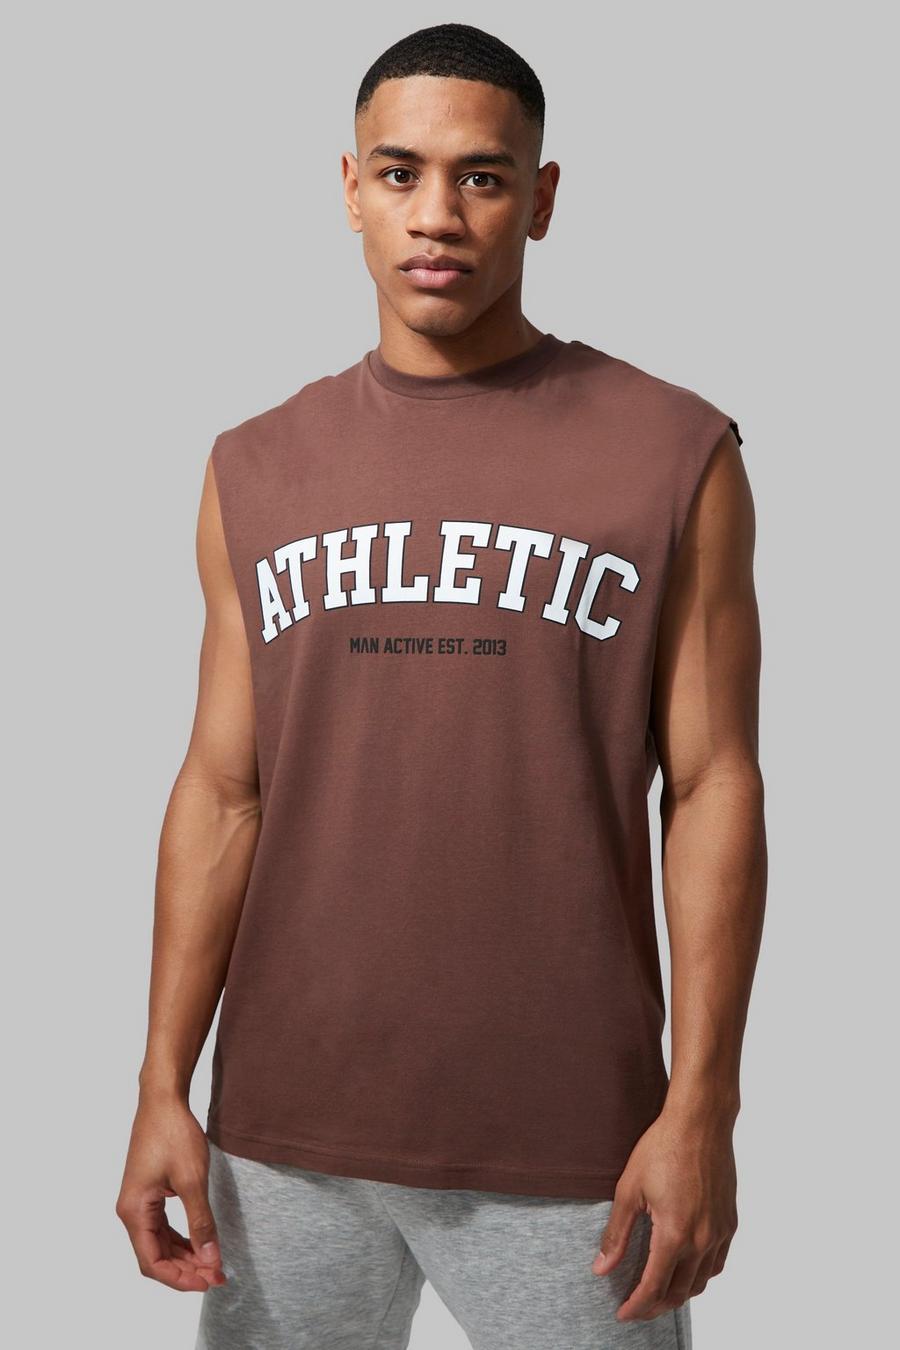 Chocolate brown Man Active Fitness Athletic Tank Top